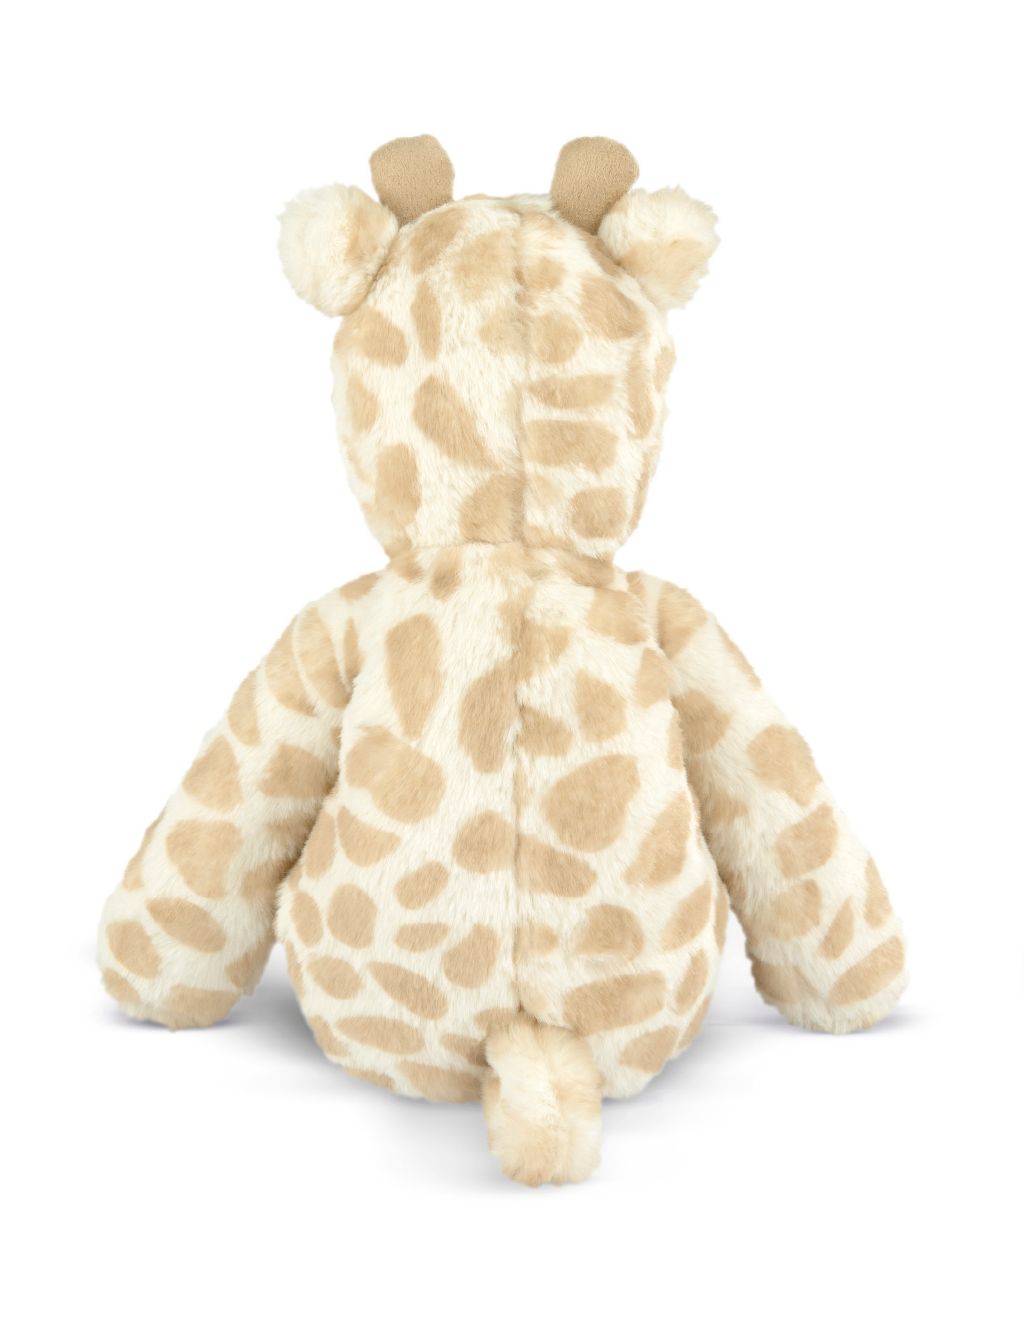 Welcome to the World Small Giraffe Soft Toy image 2